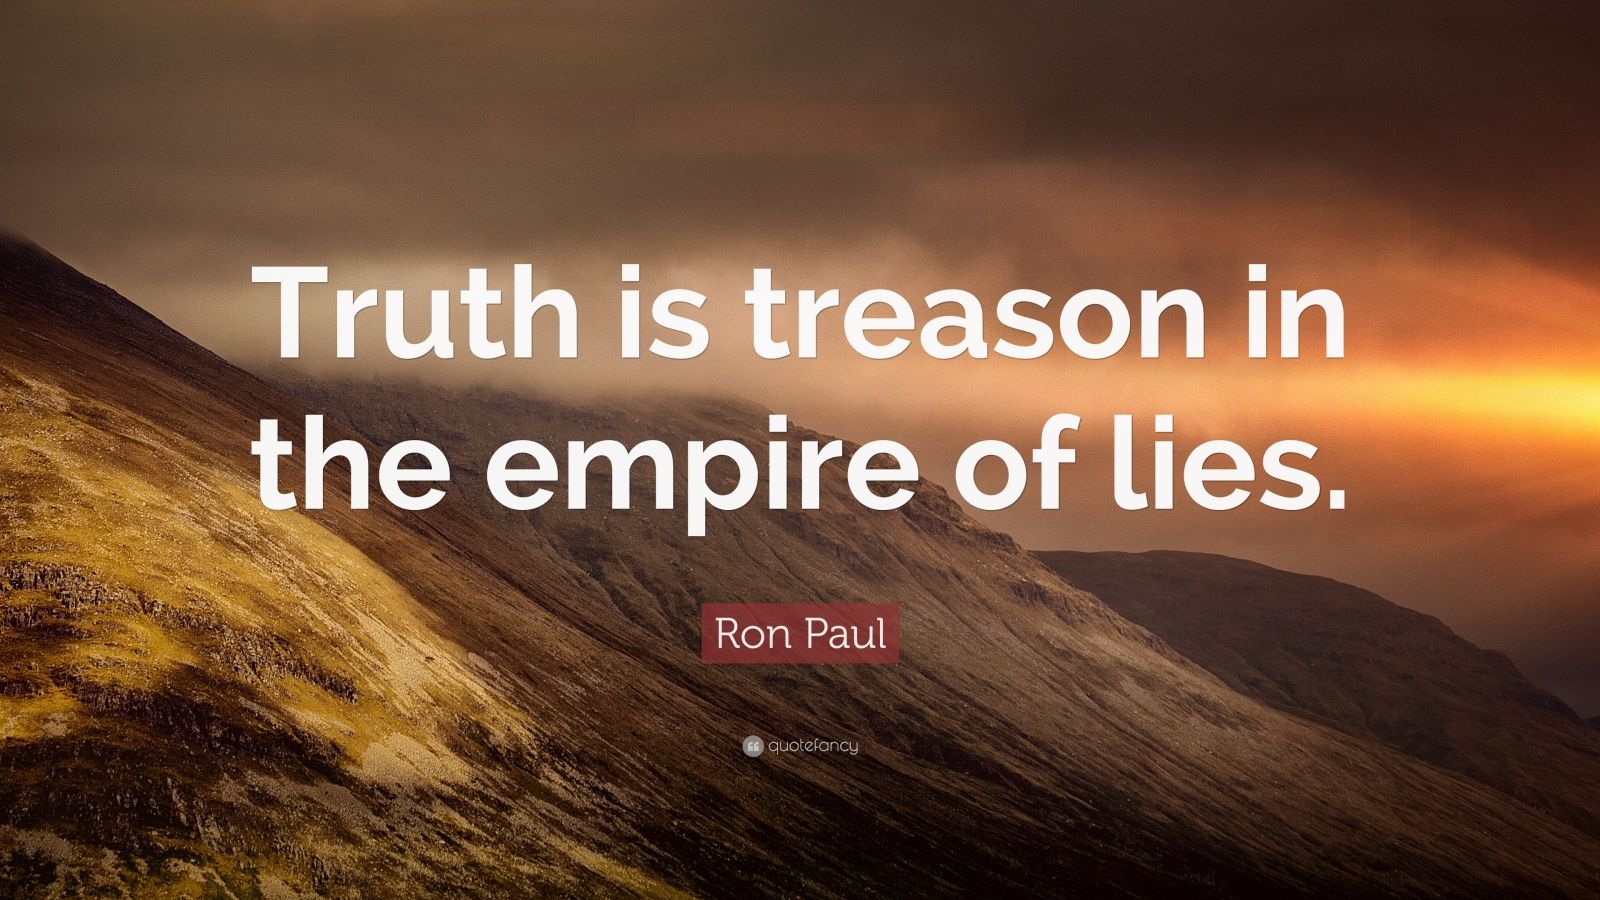 Ron Paul Quote: “Truth is treason in the empire of lies.” (12